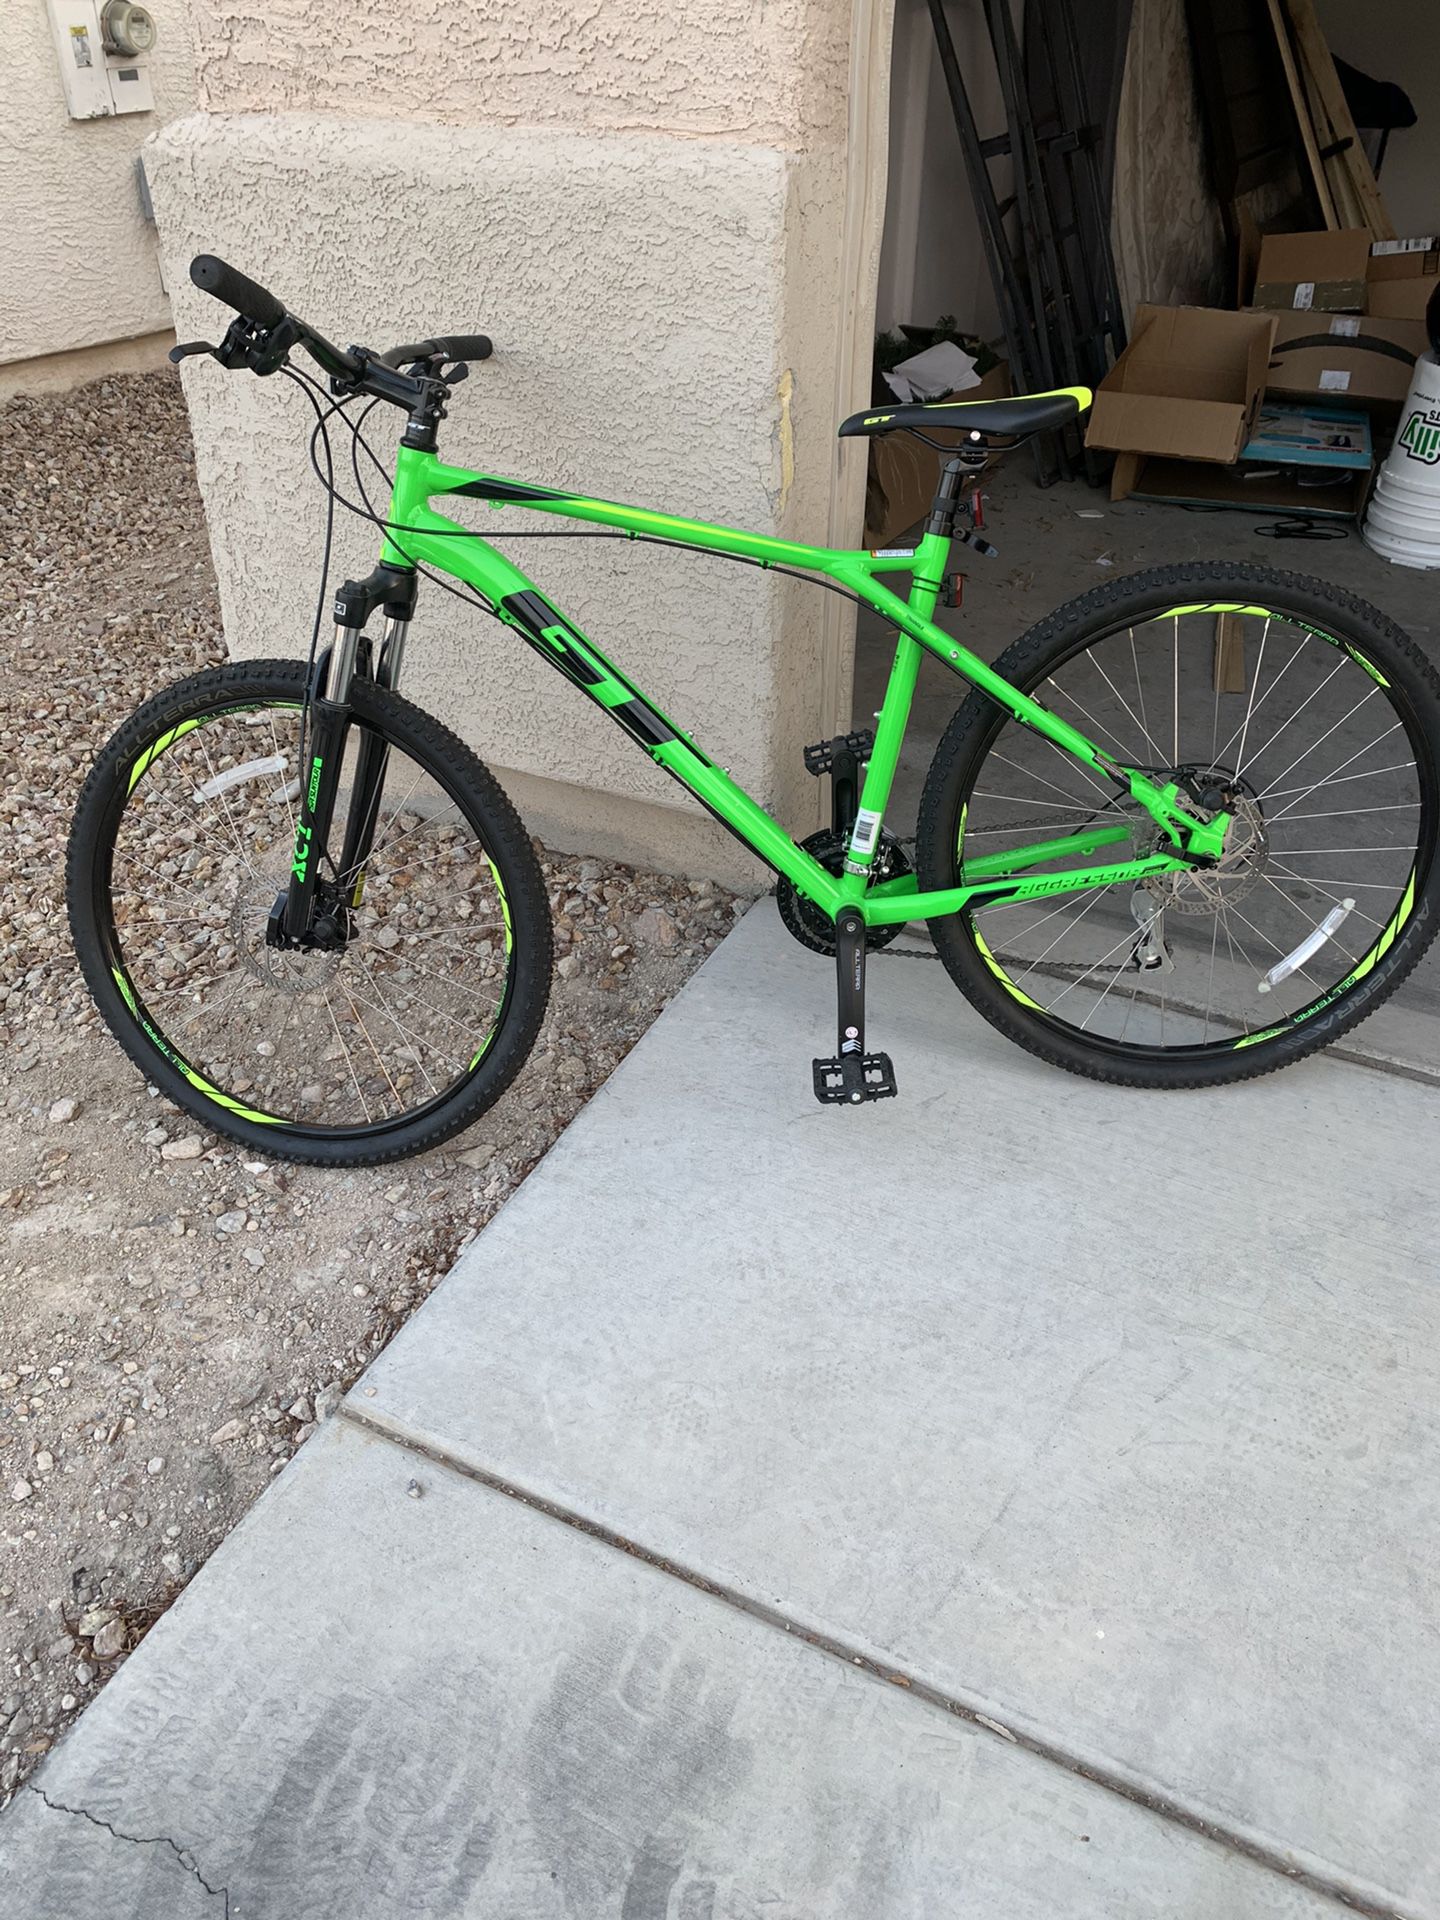 Size L 19” frame size. Brand new GT mtb only used once . Garage kept no time for it.